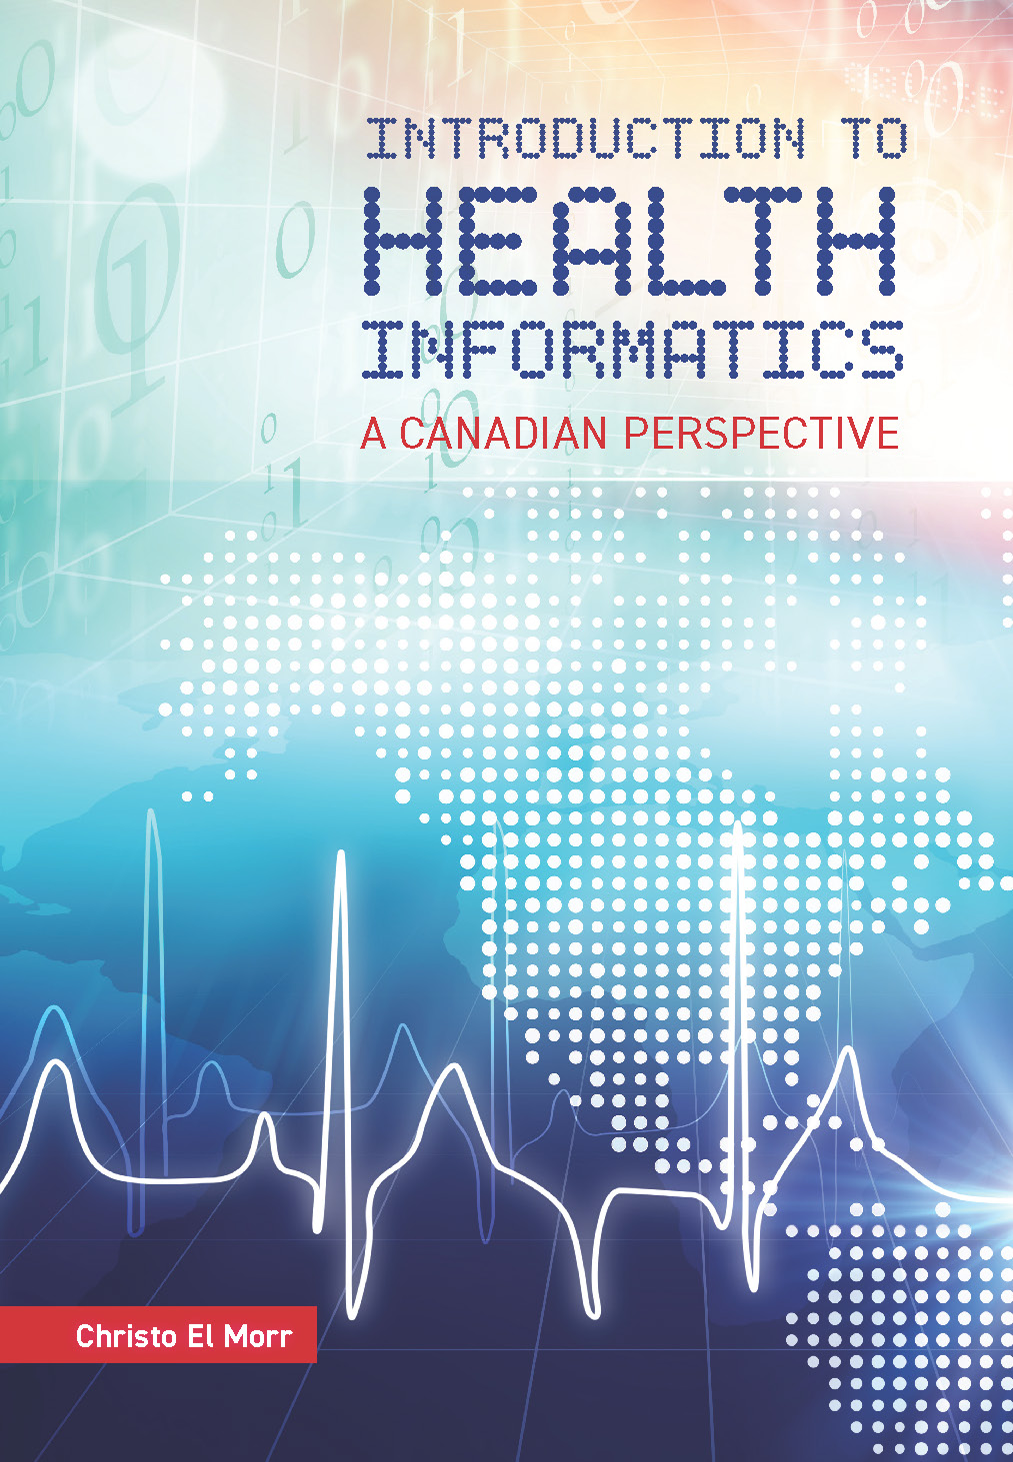 Cover for the Introduction to Health Informatics book. It shows the heart beat signal on top of the American continent drawn as pixels